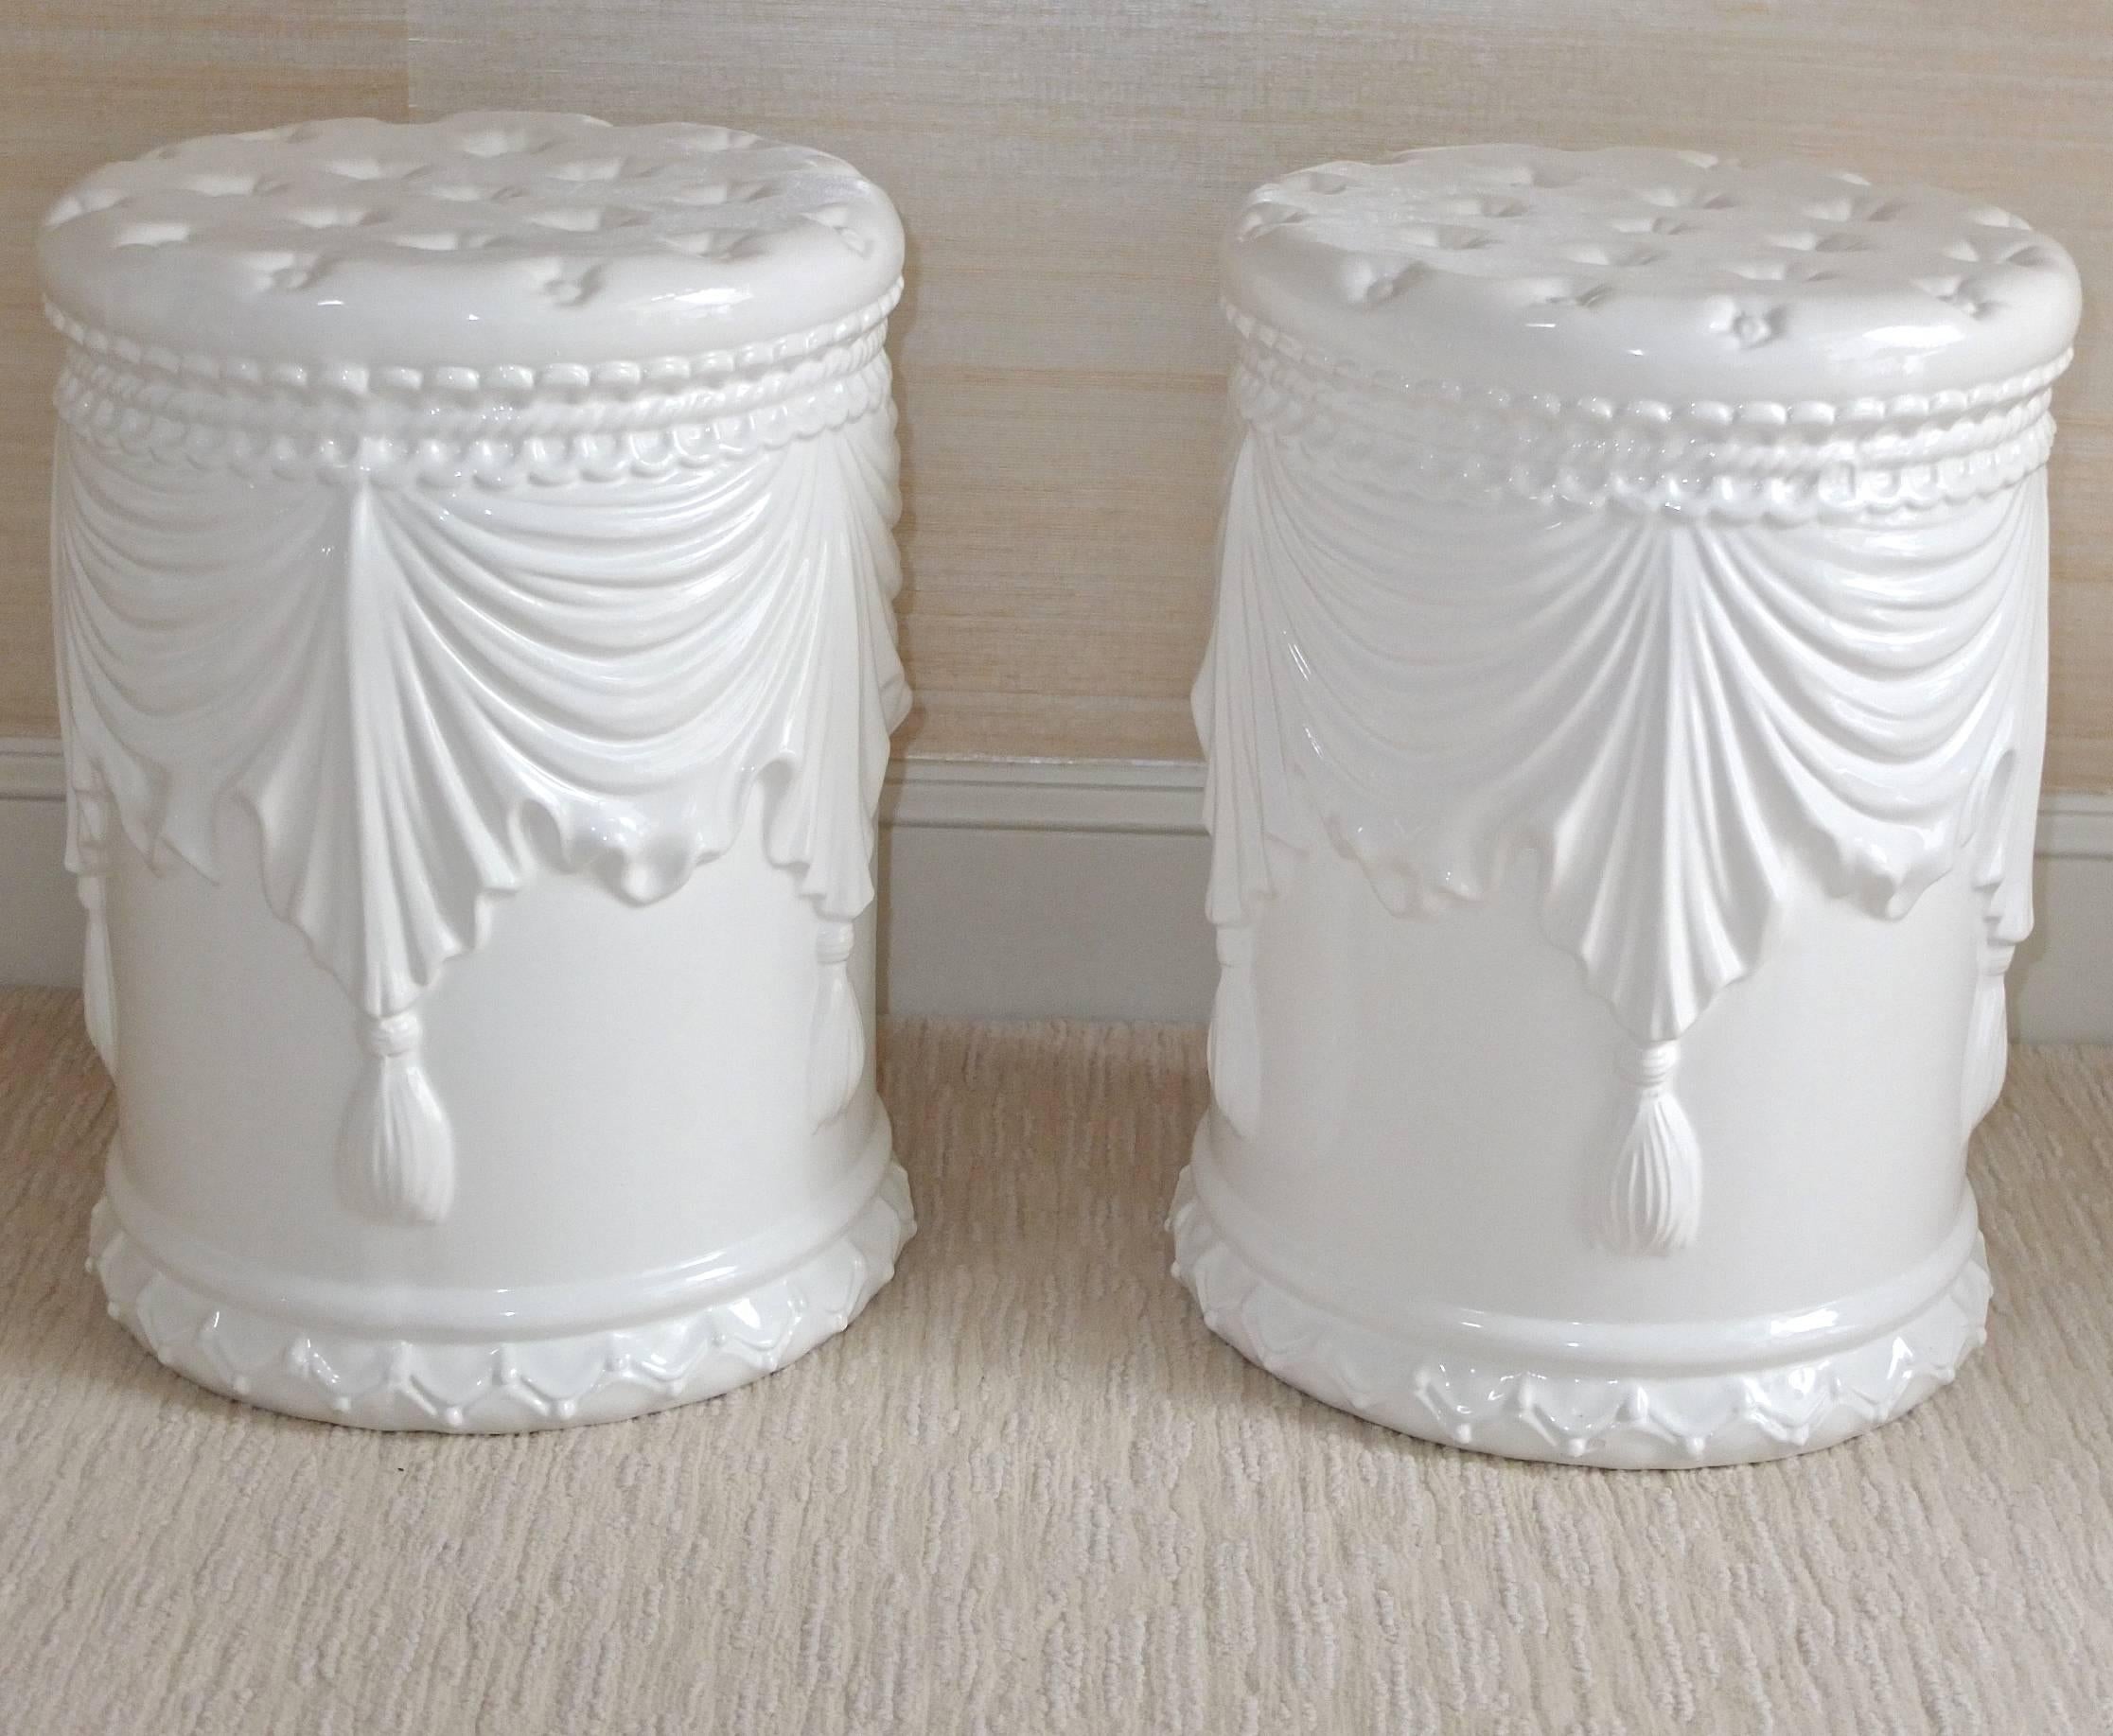 Pair of white ceramic garden stools molded with tasselled drapes and quilted cushion seat. Excellent condition.